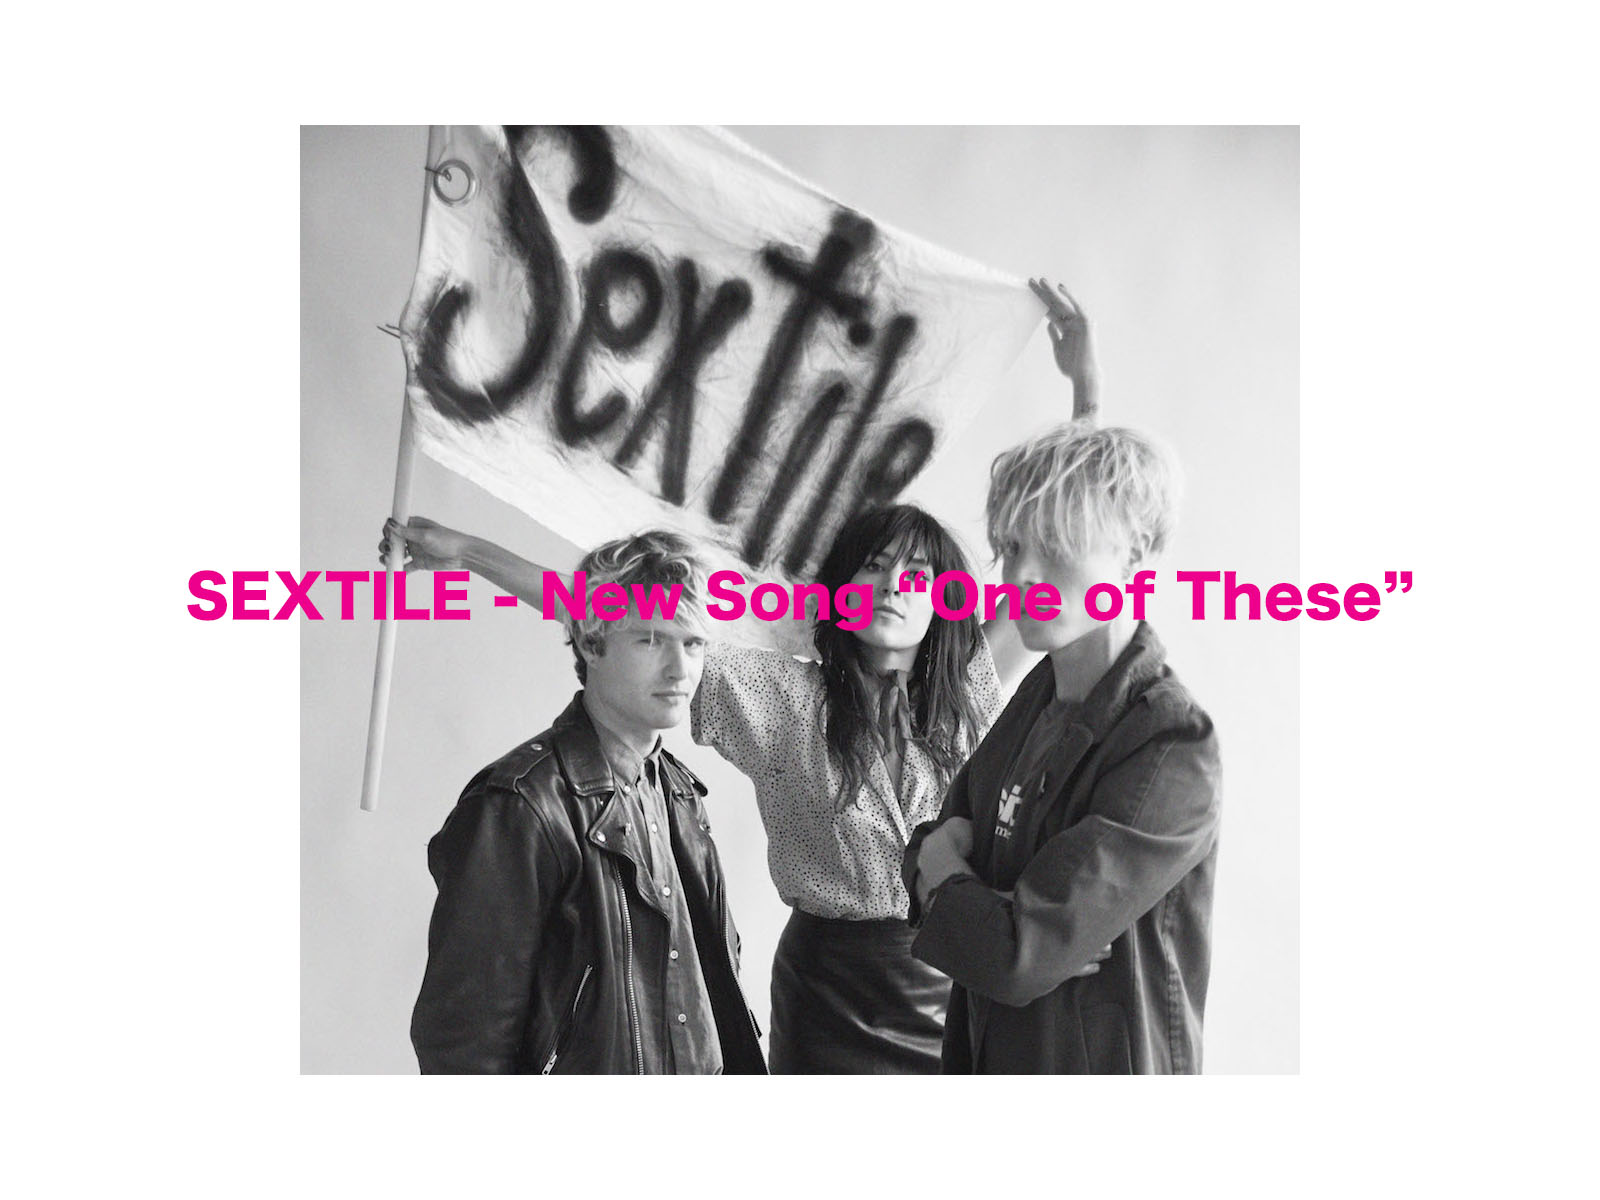 SEXTILE – New Song “One of These”